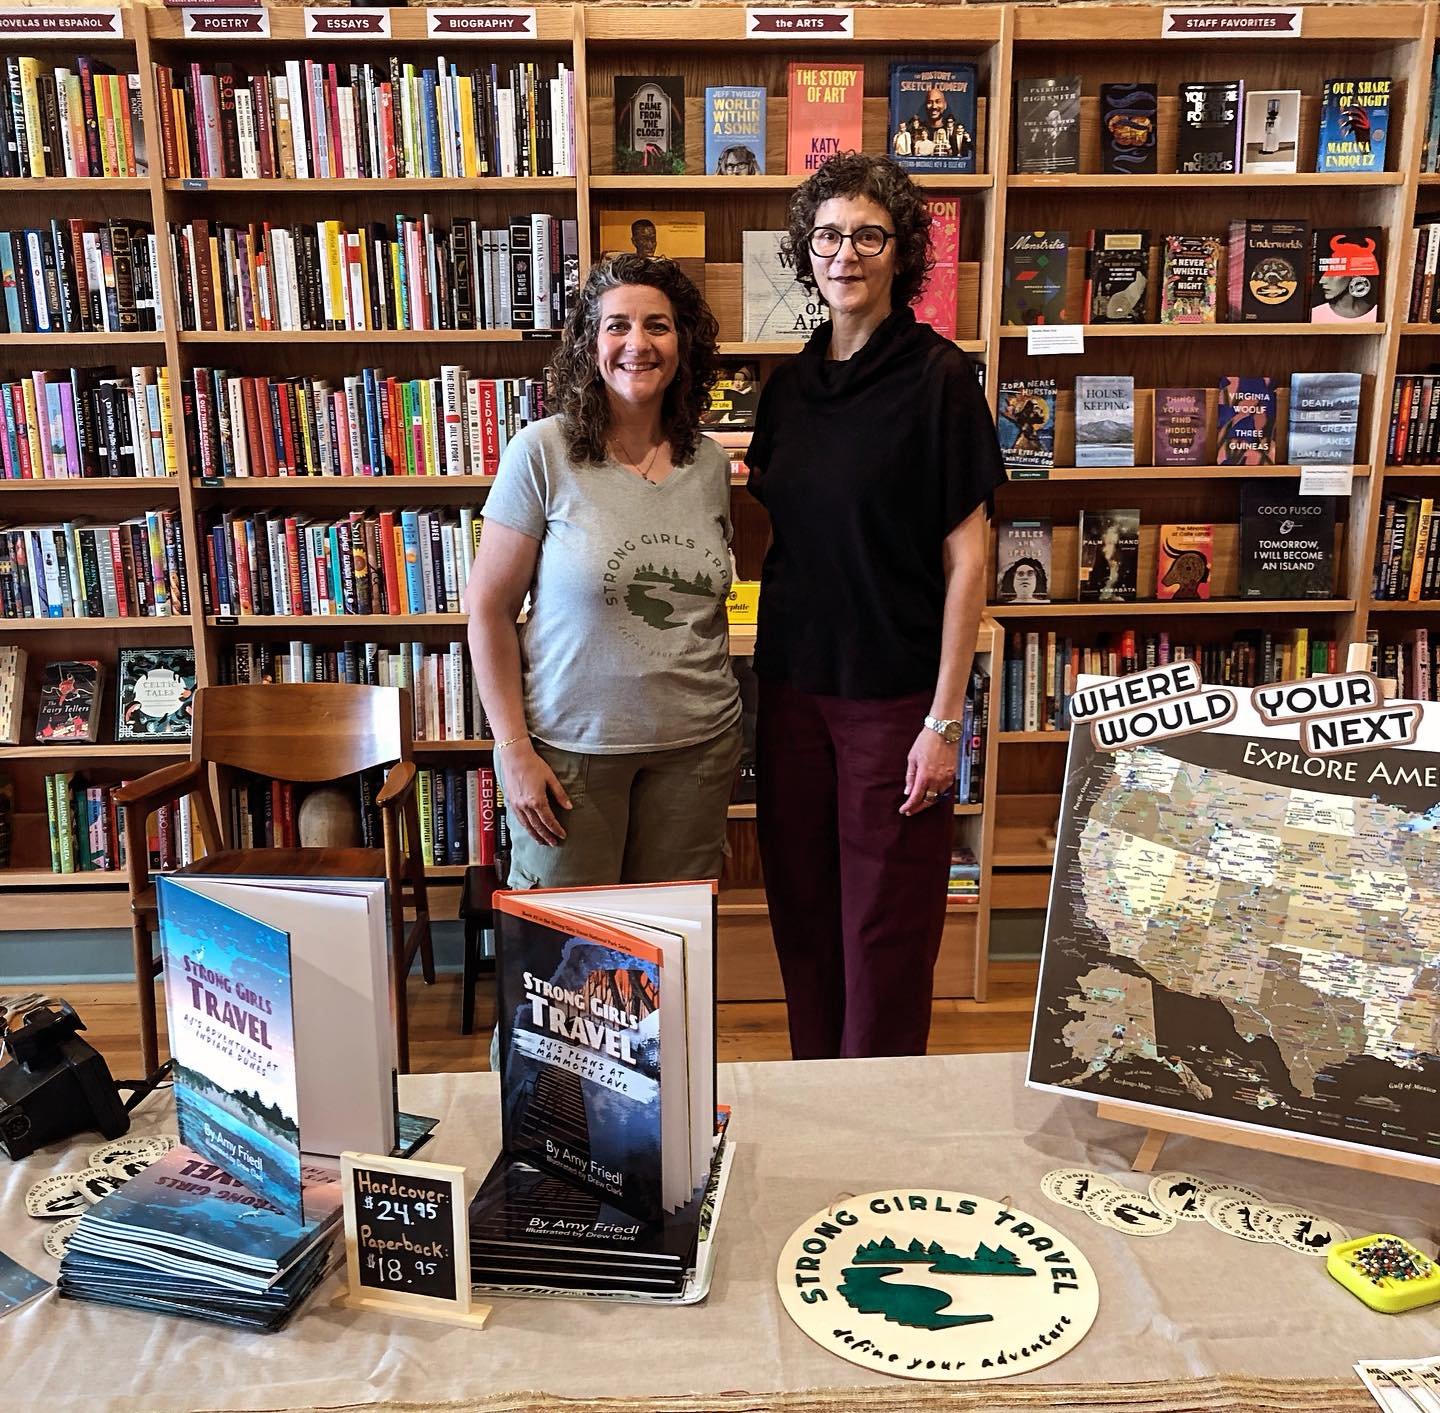 Thank you again to Amy Friedl (author of @stronggirlstravel kids books series) for stopping out and sharing your stories and adventures with the community! It was such a pleasure meeting Amy and dreaming about our next travel destinations 🤩

******
